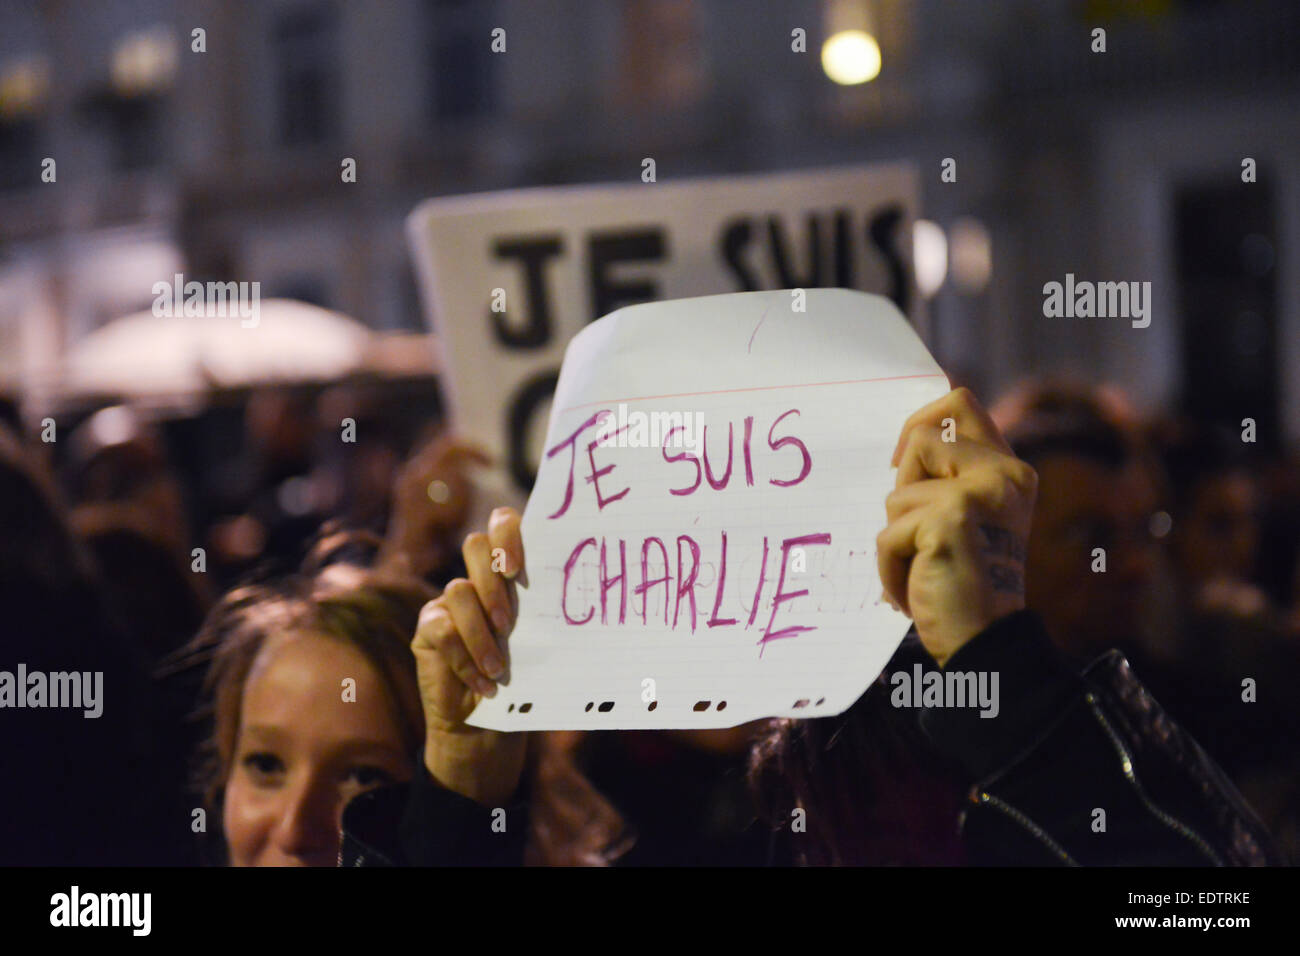 Cine Lumiere, South Kensington, London, UK. 9th January 2015. A vigil for the victims of the Charlie Hebdo massacre is held at the Cine Lumiere in South Kensington, London. Credit:  Matthew Chattle/Alamy Live News Stock Photo